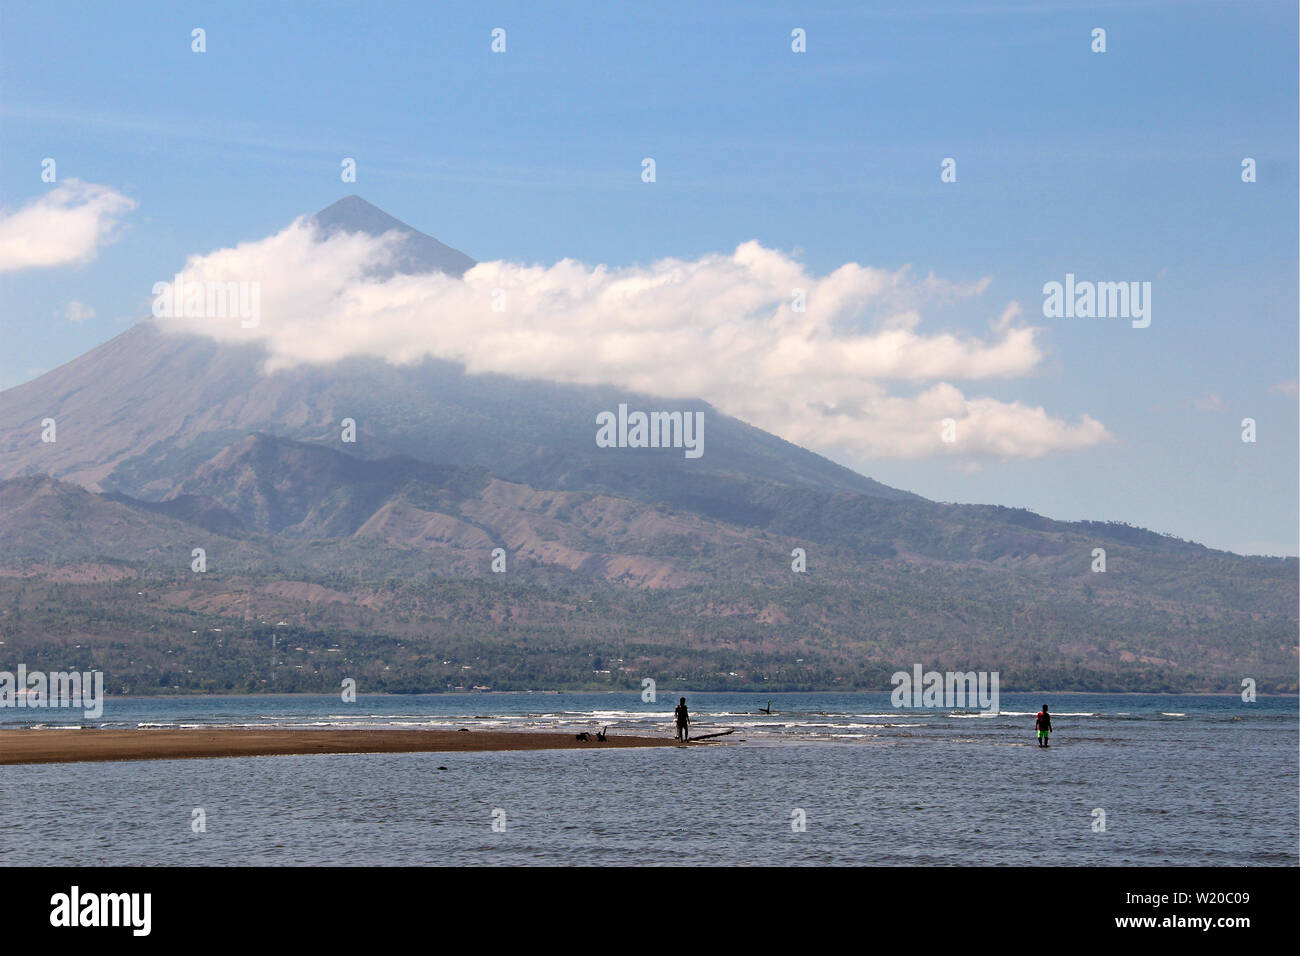 Fishers in the water of a lake in front of a high volcano with clouds in Sulawesi, Indonesia. Stock Photo